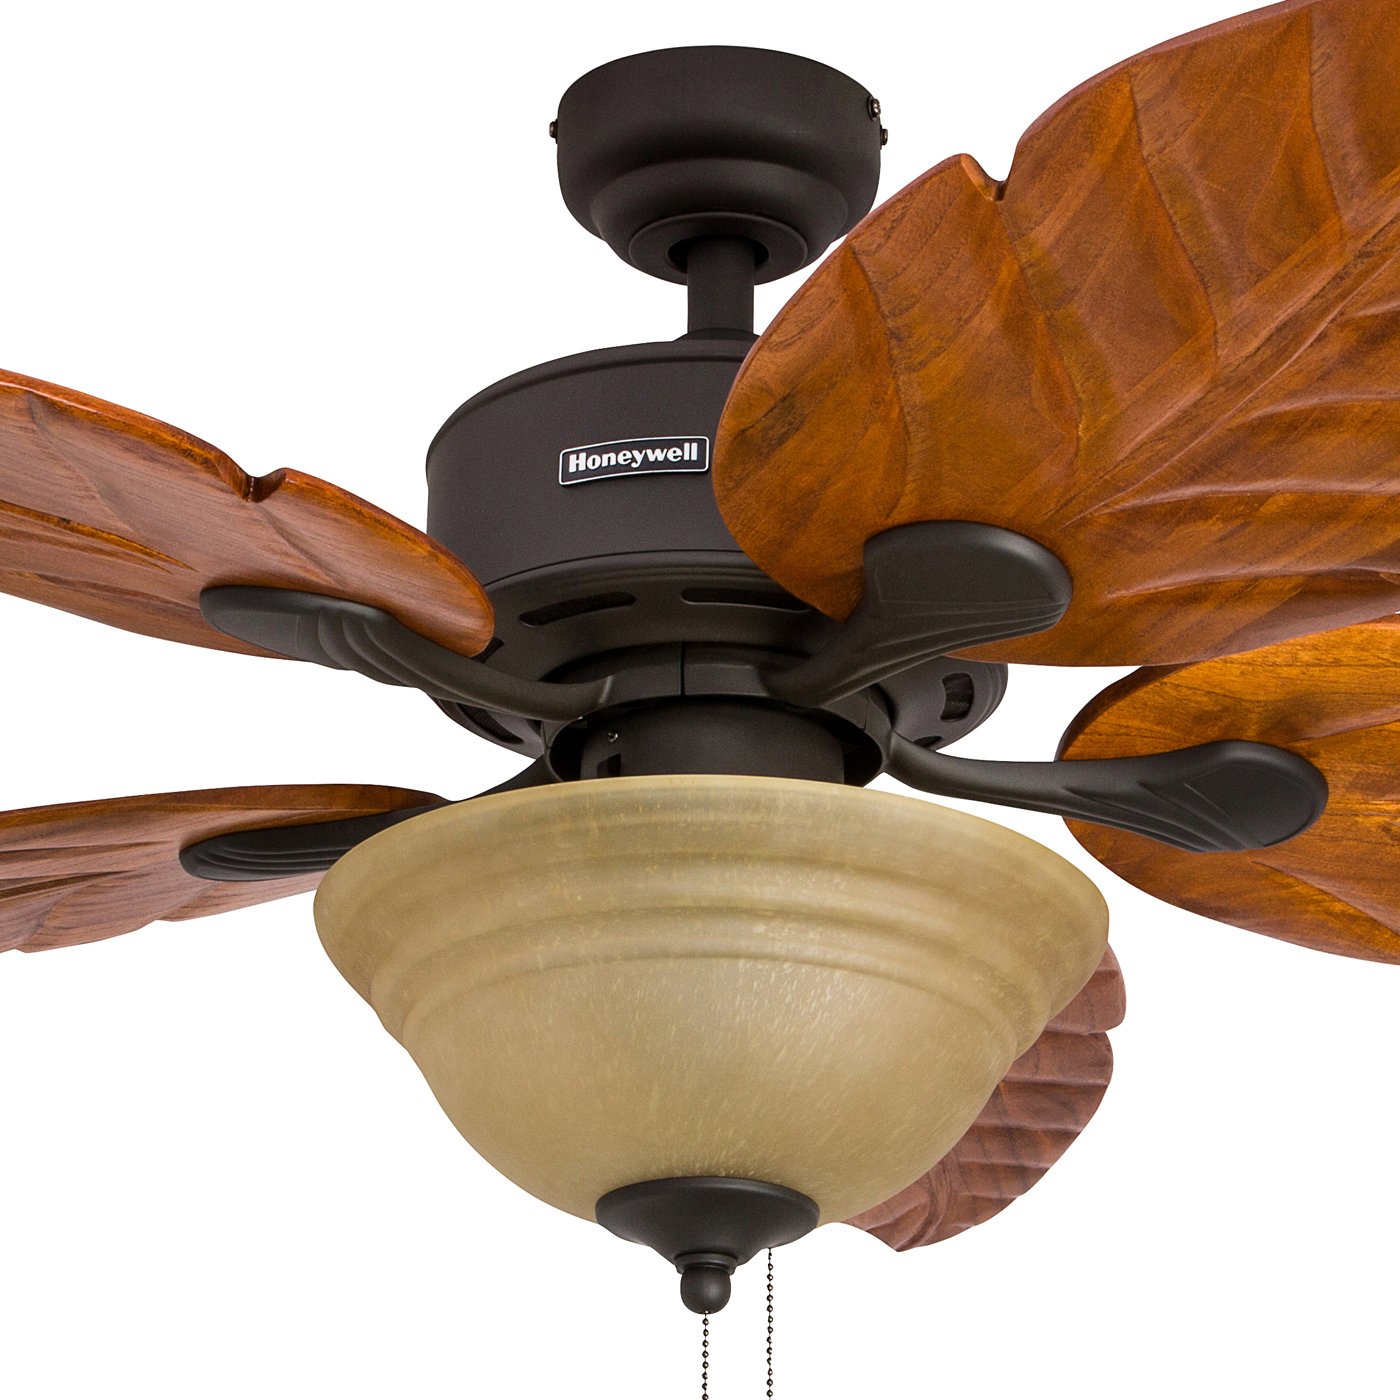 Honeywell Ceiling Fans Royal Palm, 52 Inch Tropical LED Ceiling Fan with Light, Pull Chain, Three Mounting Options, Hand Carved Solid Wood Blades - 50204-01 (Bronze)